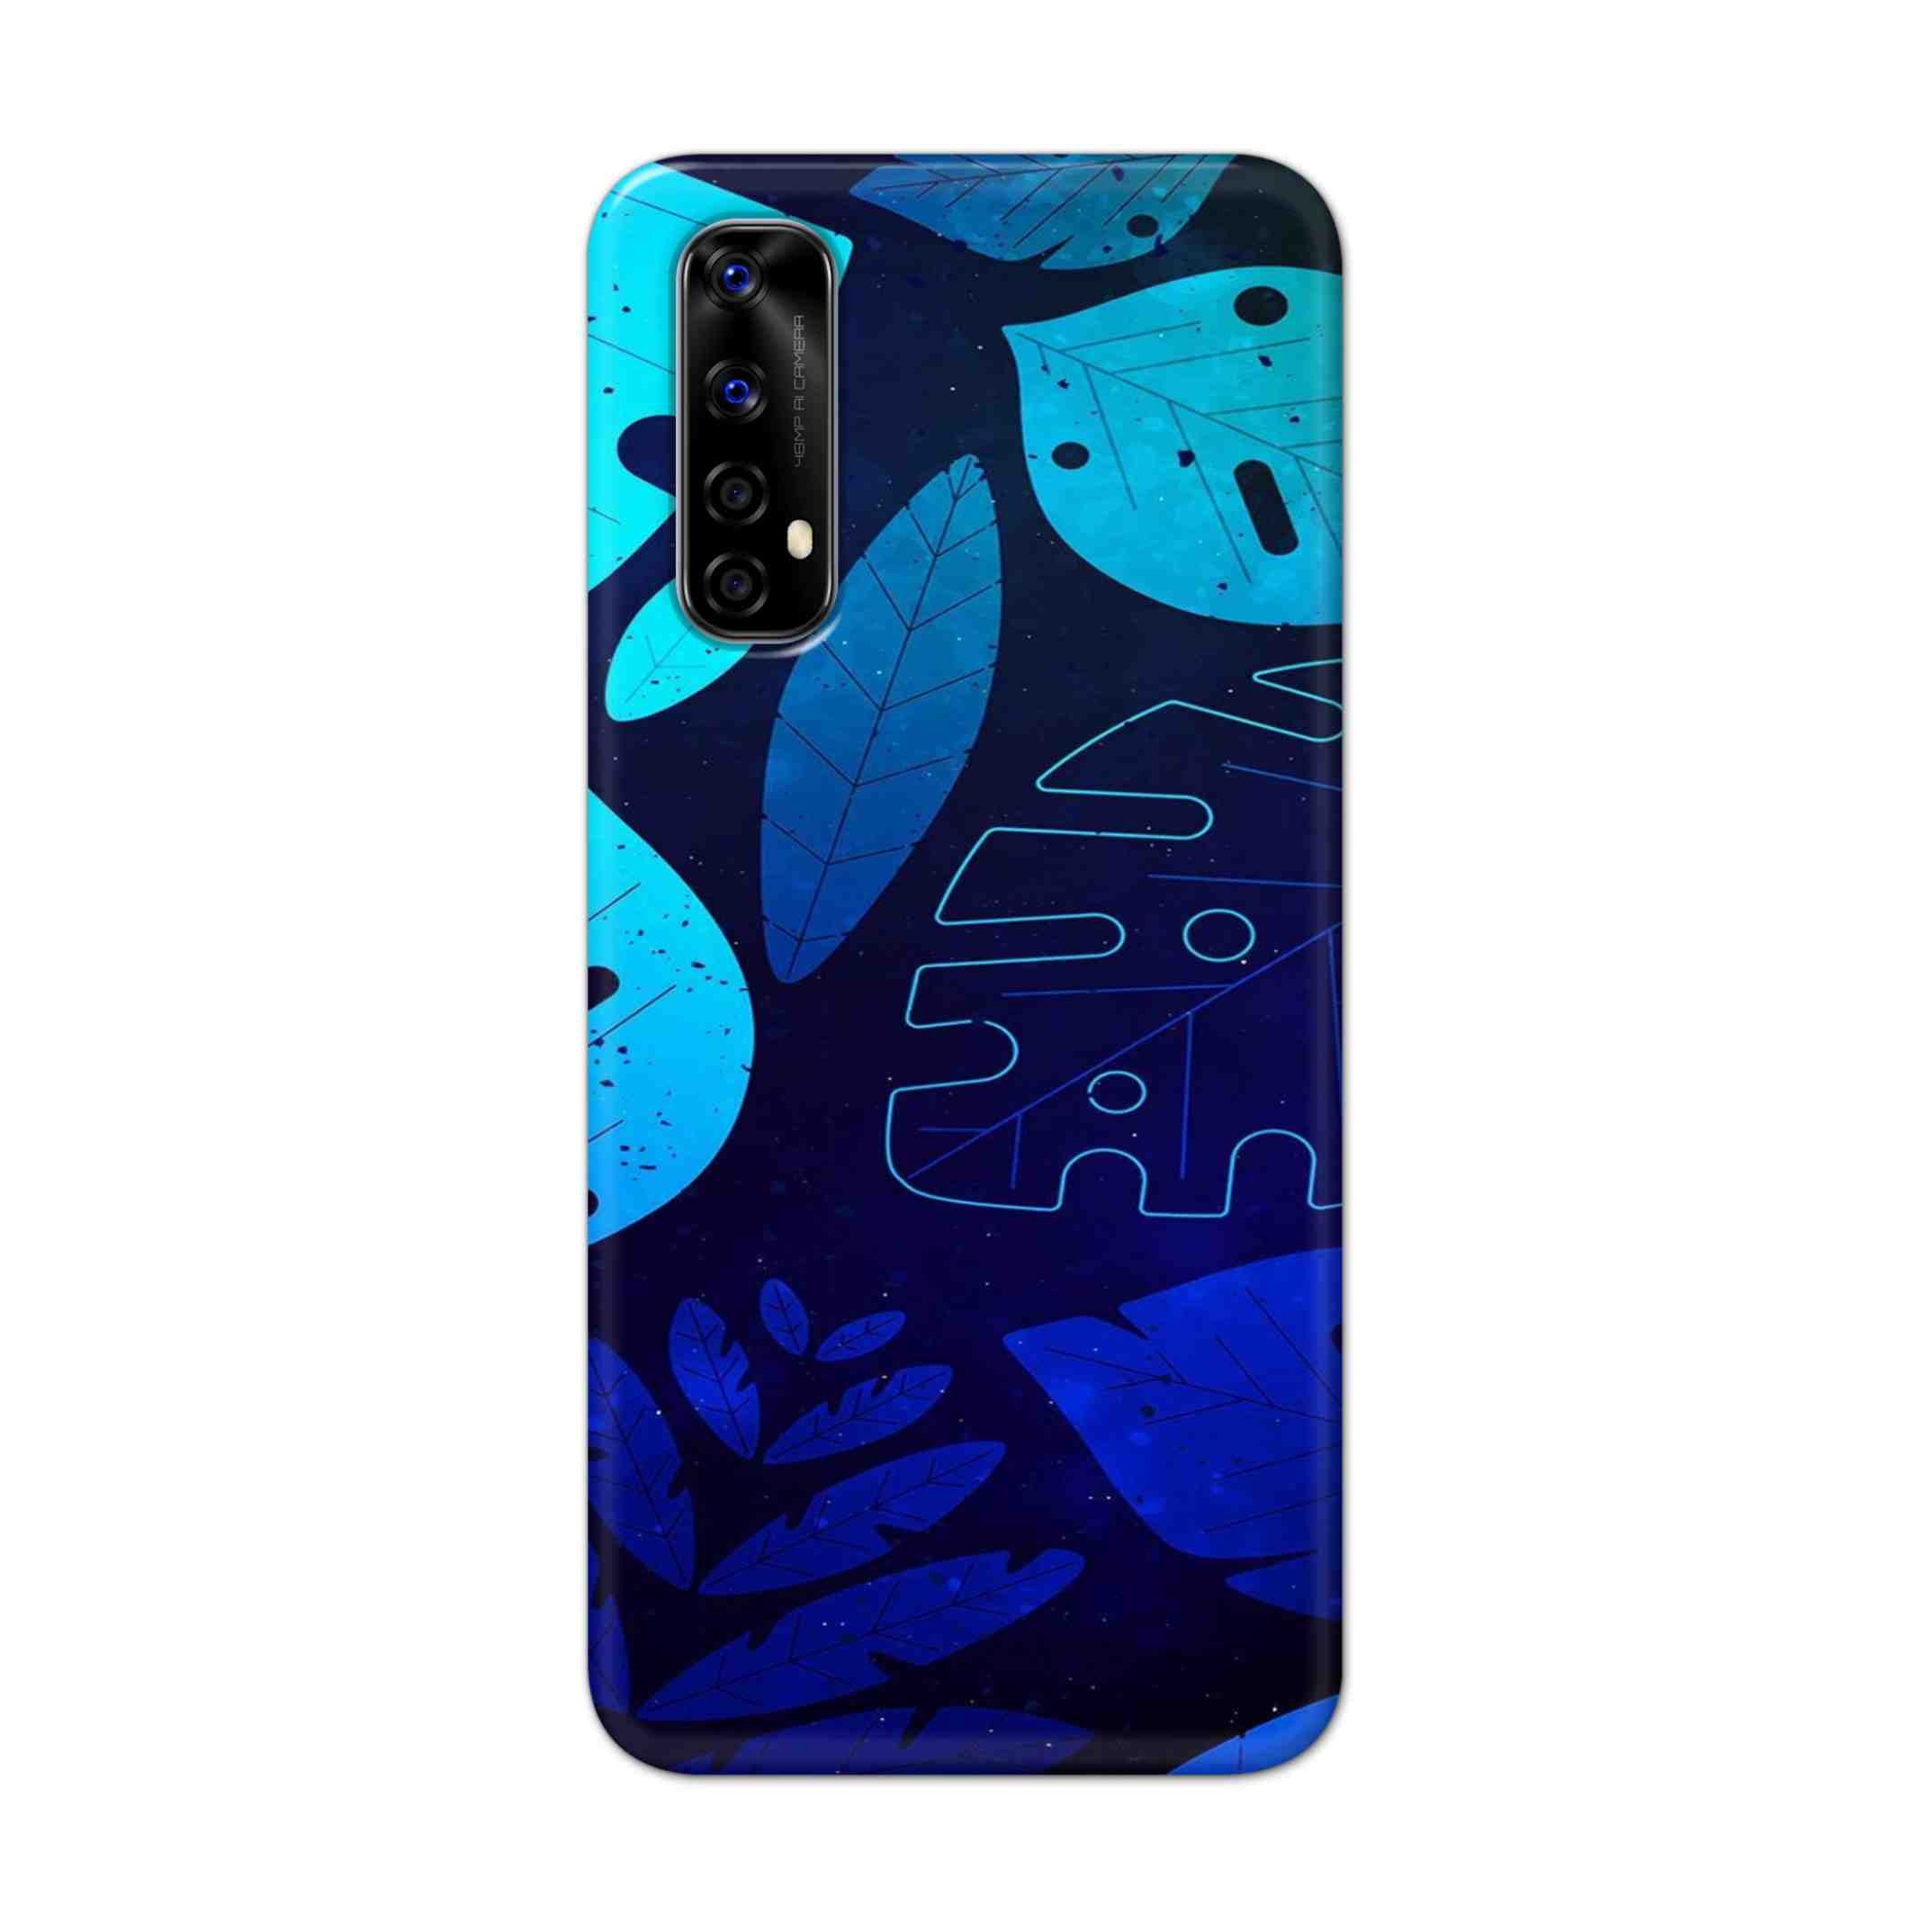 Buy Neon Leaf Hard Back Mobile Phone Case Cover For Realme Narzo 20 Pro Online